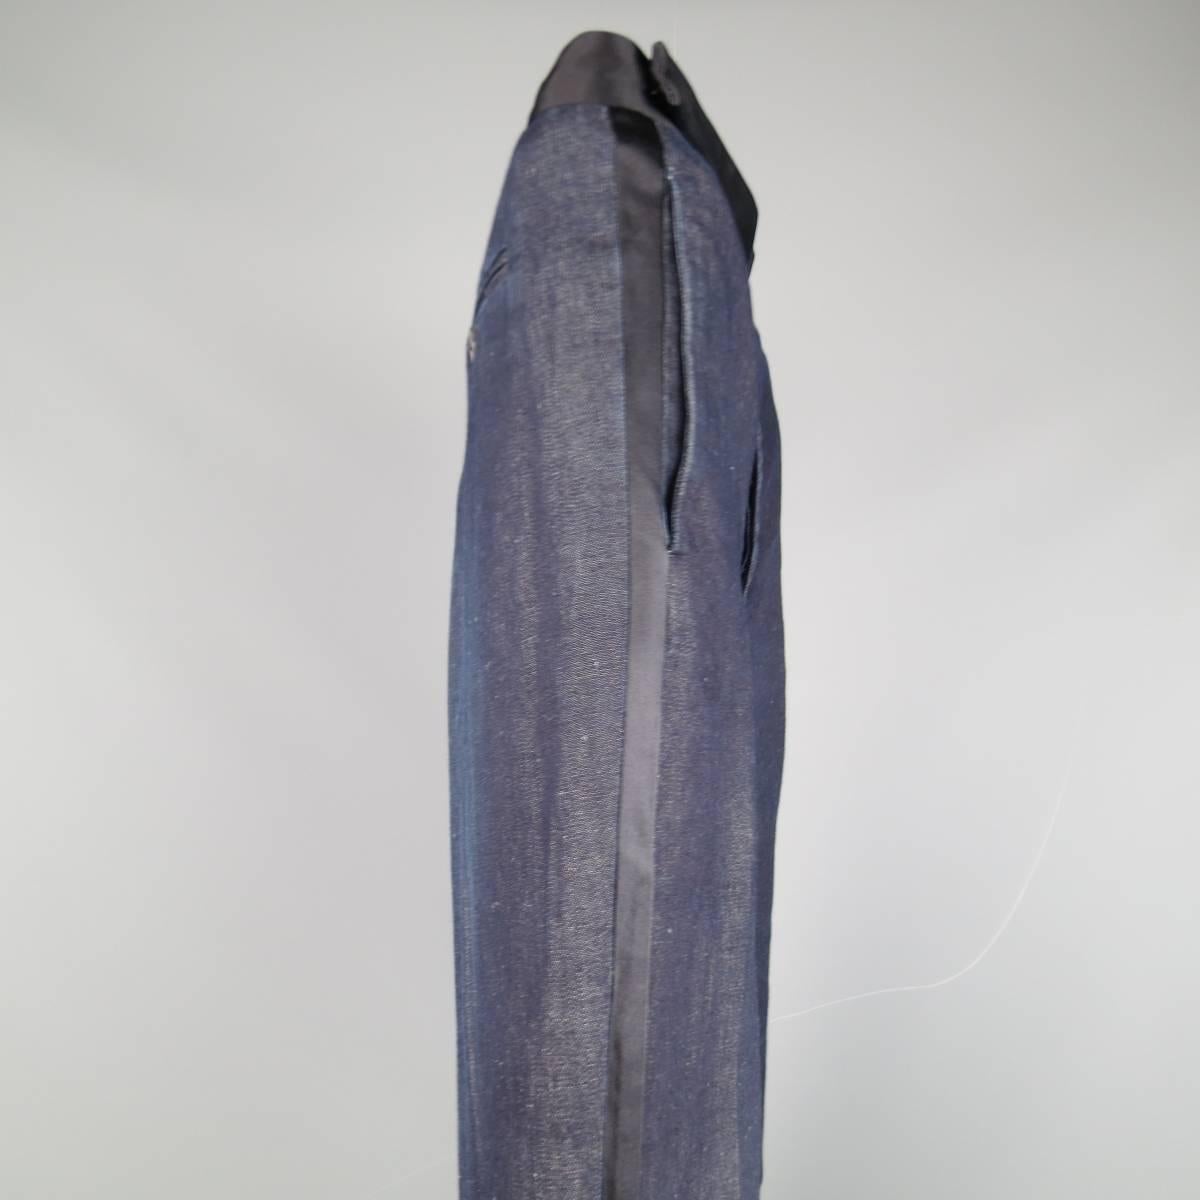 MASON MARTIN MARGIELA trousers in a classic deep indigo blue denim featuring black satin tuxedo stripes and waistband.  Made in Italy.
 
Excellent Pre-Owned Condition.
Marked: IT 50
 
Measurements:
 
Waist: 35 in.
Rise: 11 in.
Inseam:  32 in.
